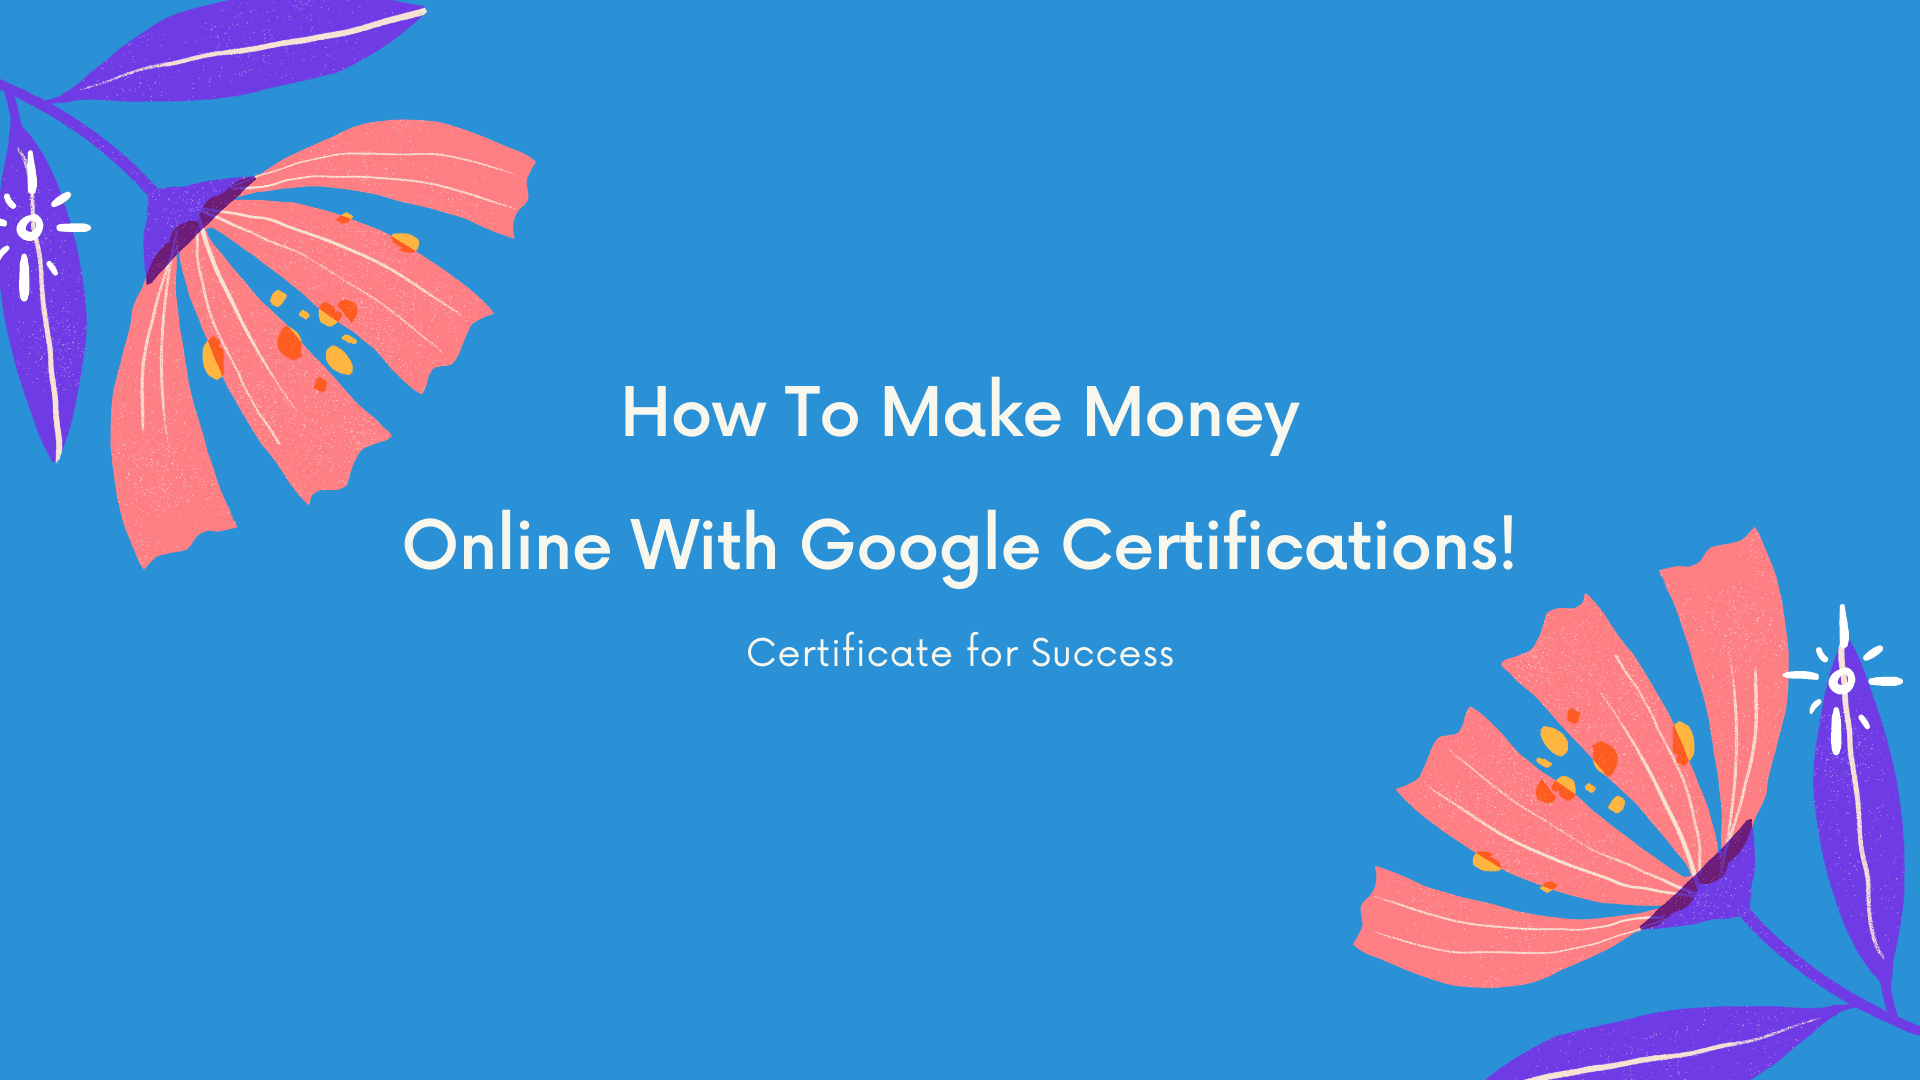 How To Make Money Online With Google Certifications!